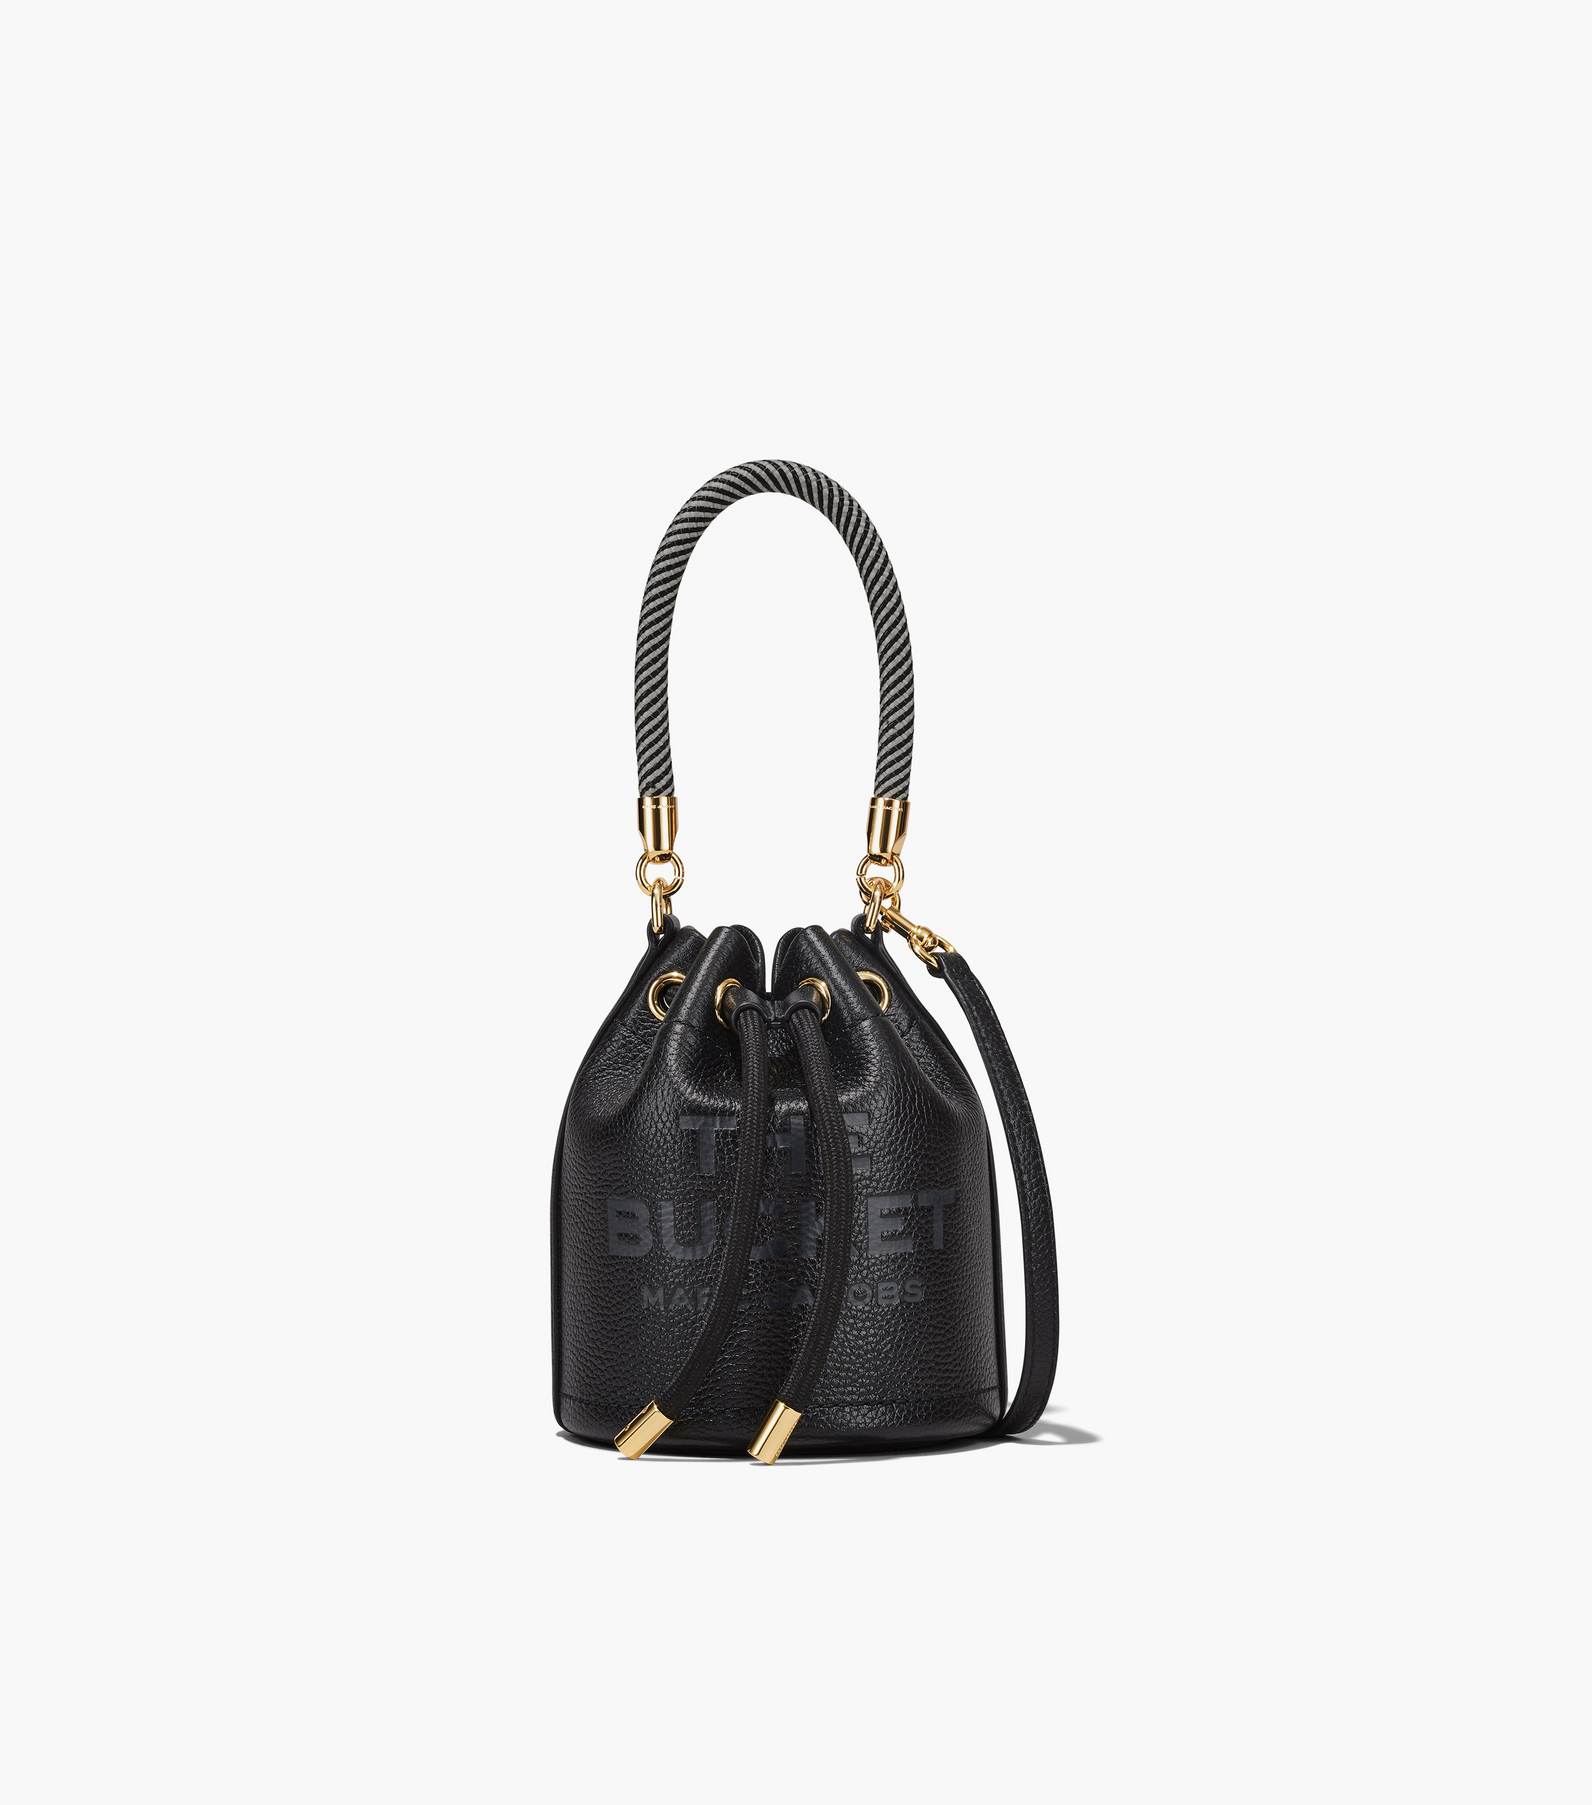 MARCJACOBSMARC JACOBSマークジェイコブスTHE LEATHER SMALL黒